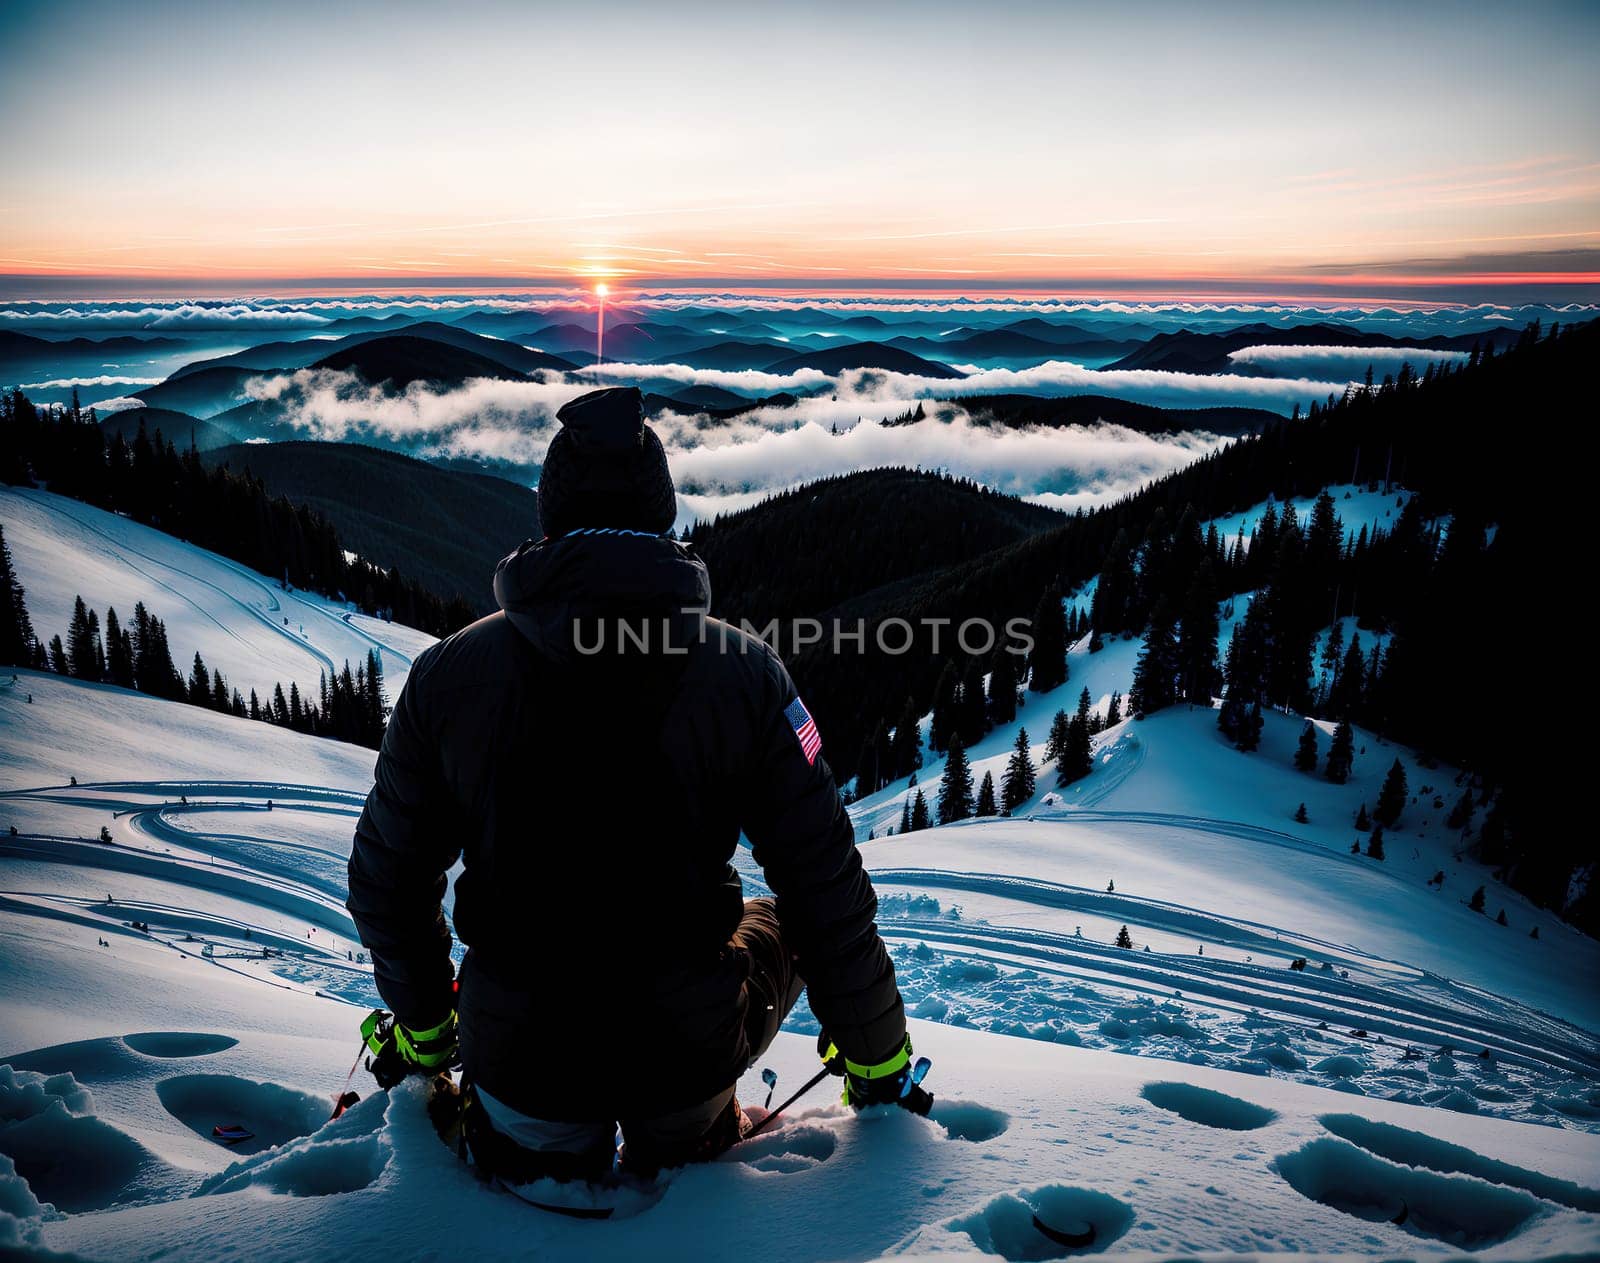 The image shows a person sitting on top of a snowy mountain, looking out at the sunset with a smile on their face.